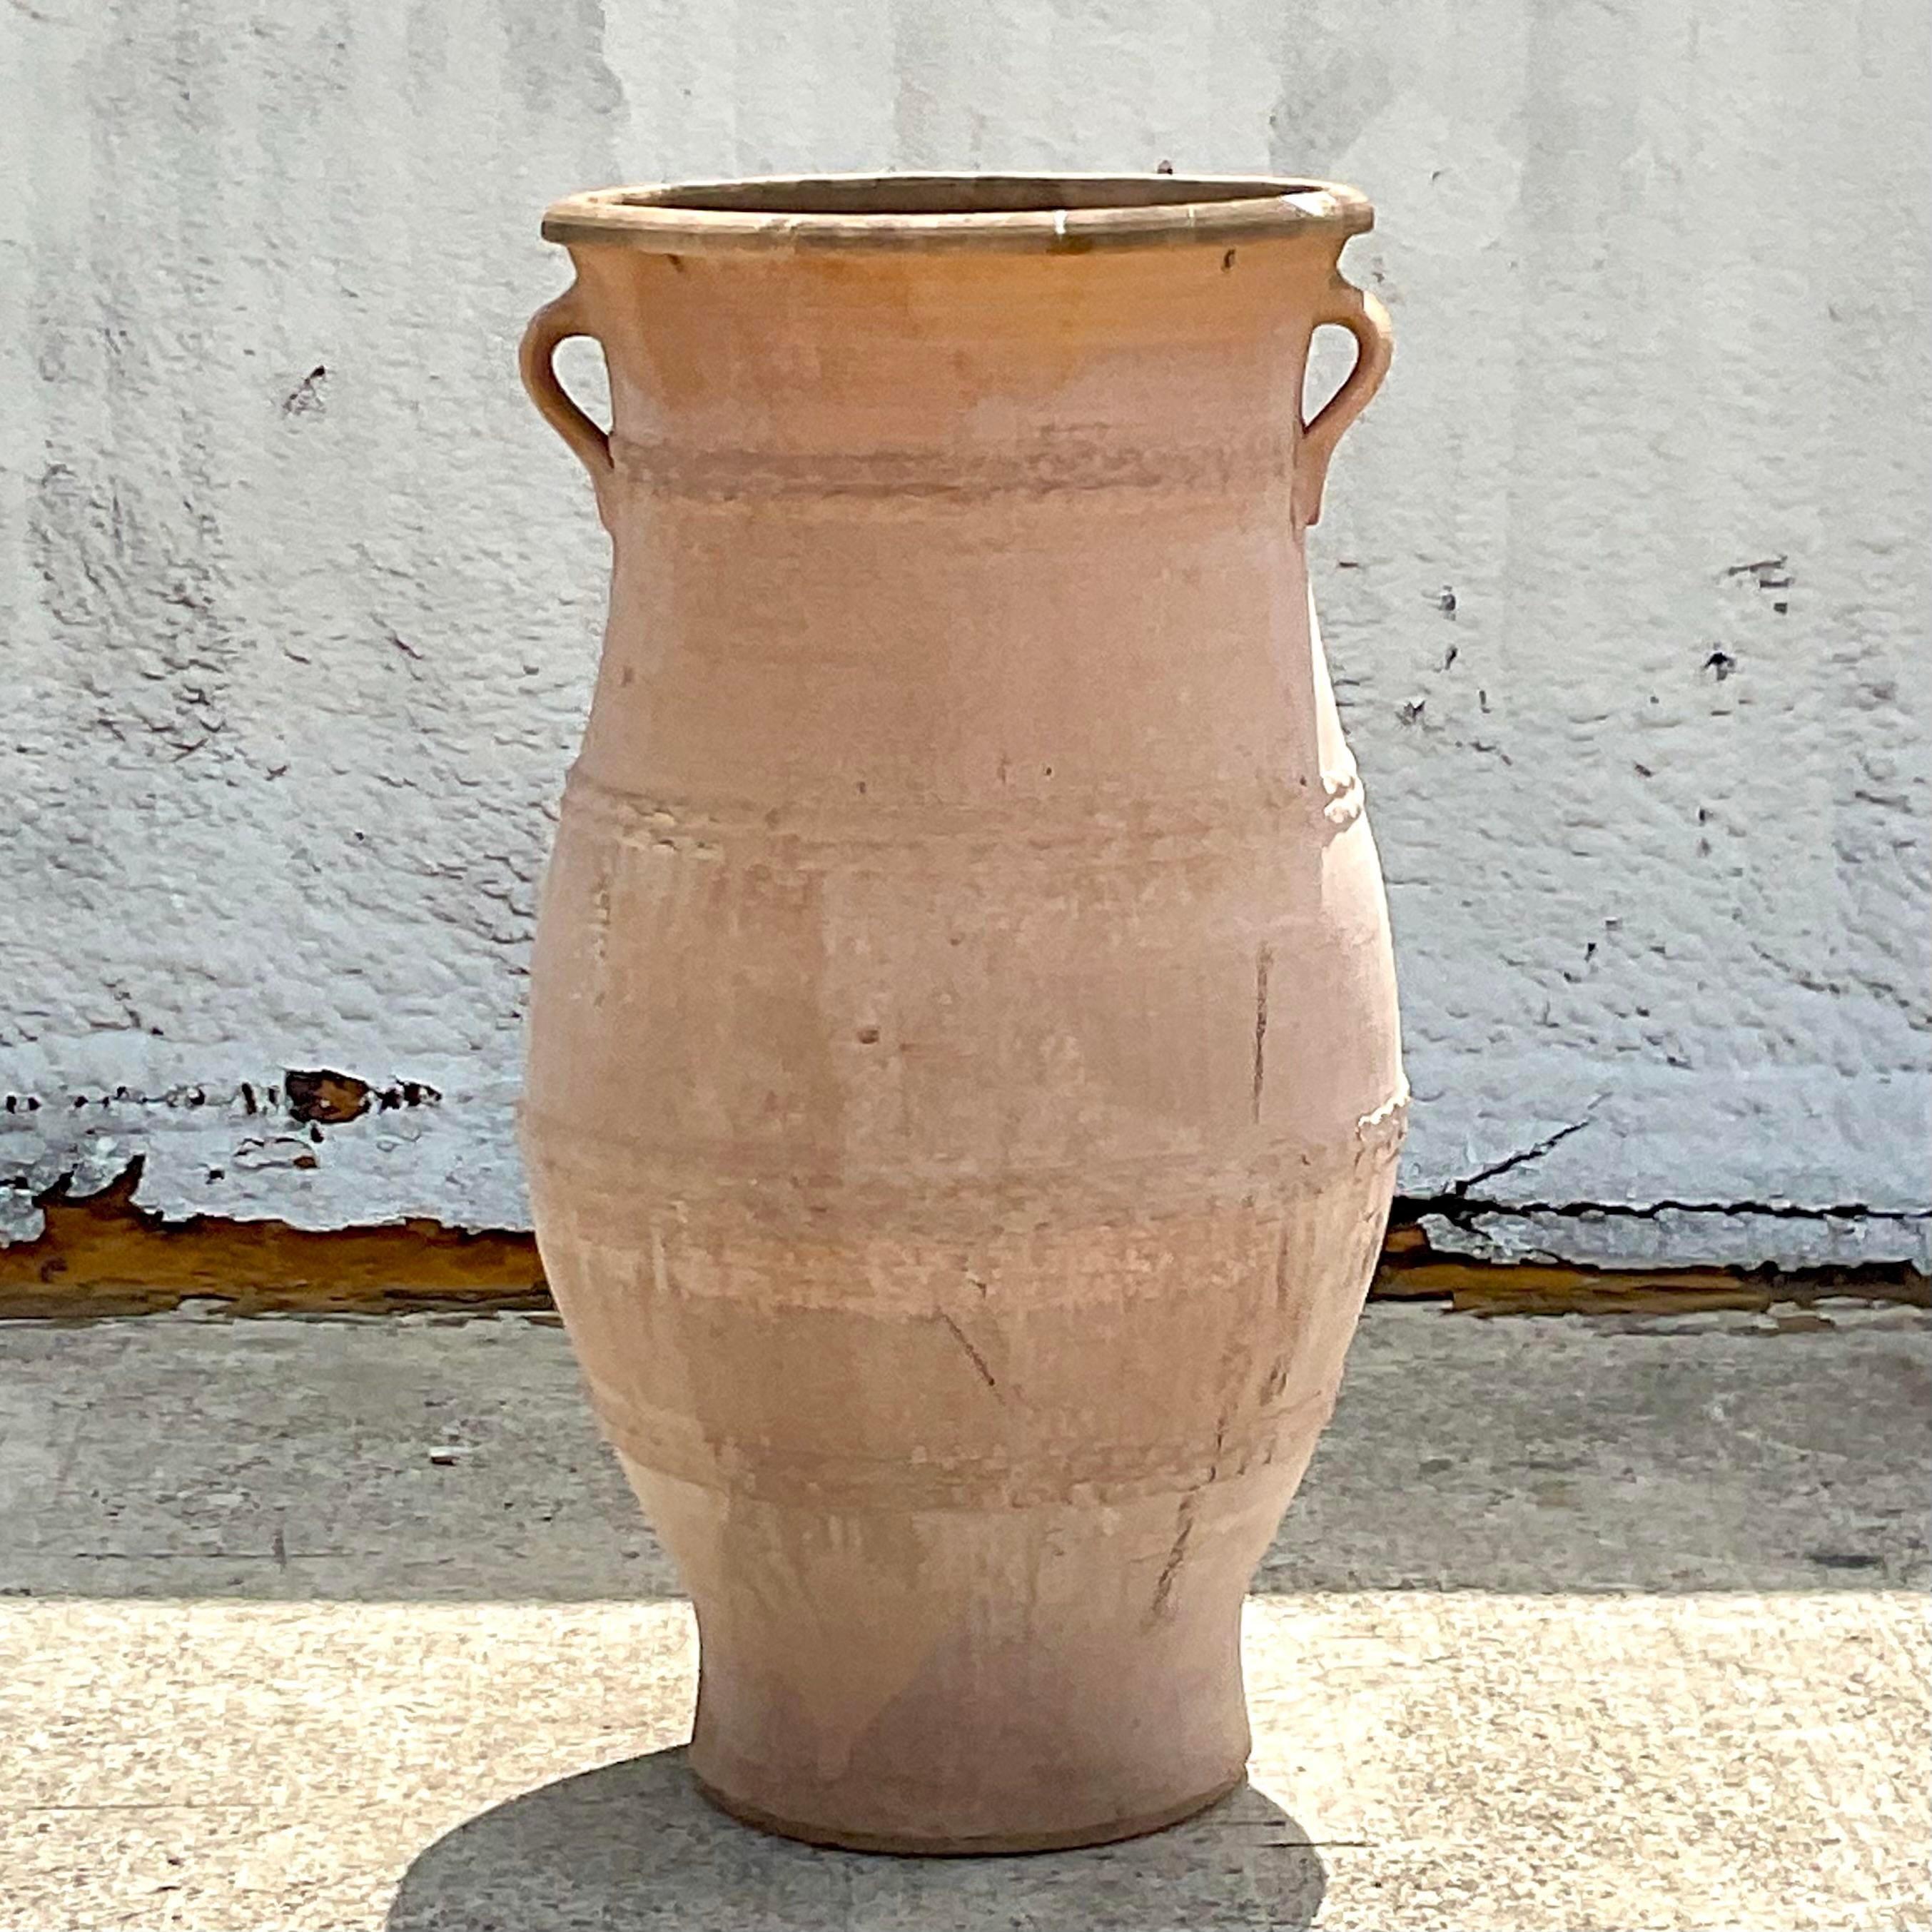 A fabulous monumental terracotta olive jar planters that can add to your outdoor decor. Acquired at a Palm beach estate.